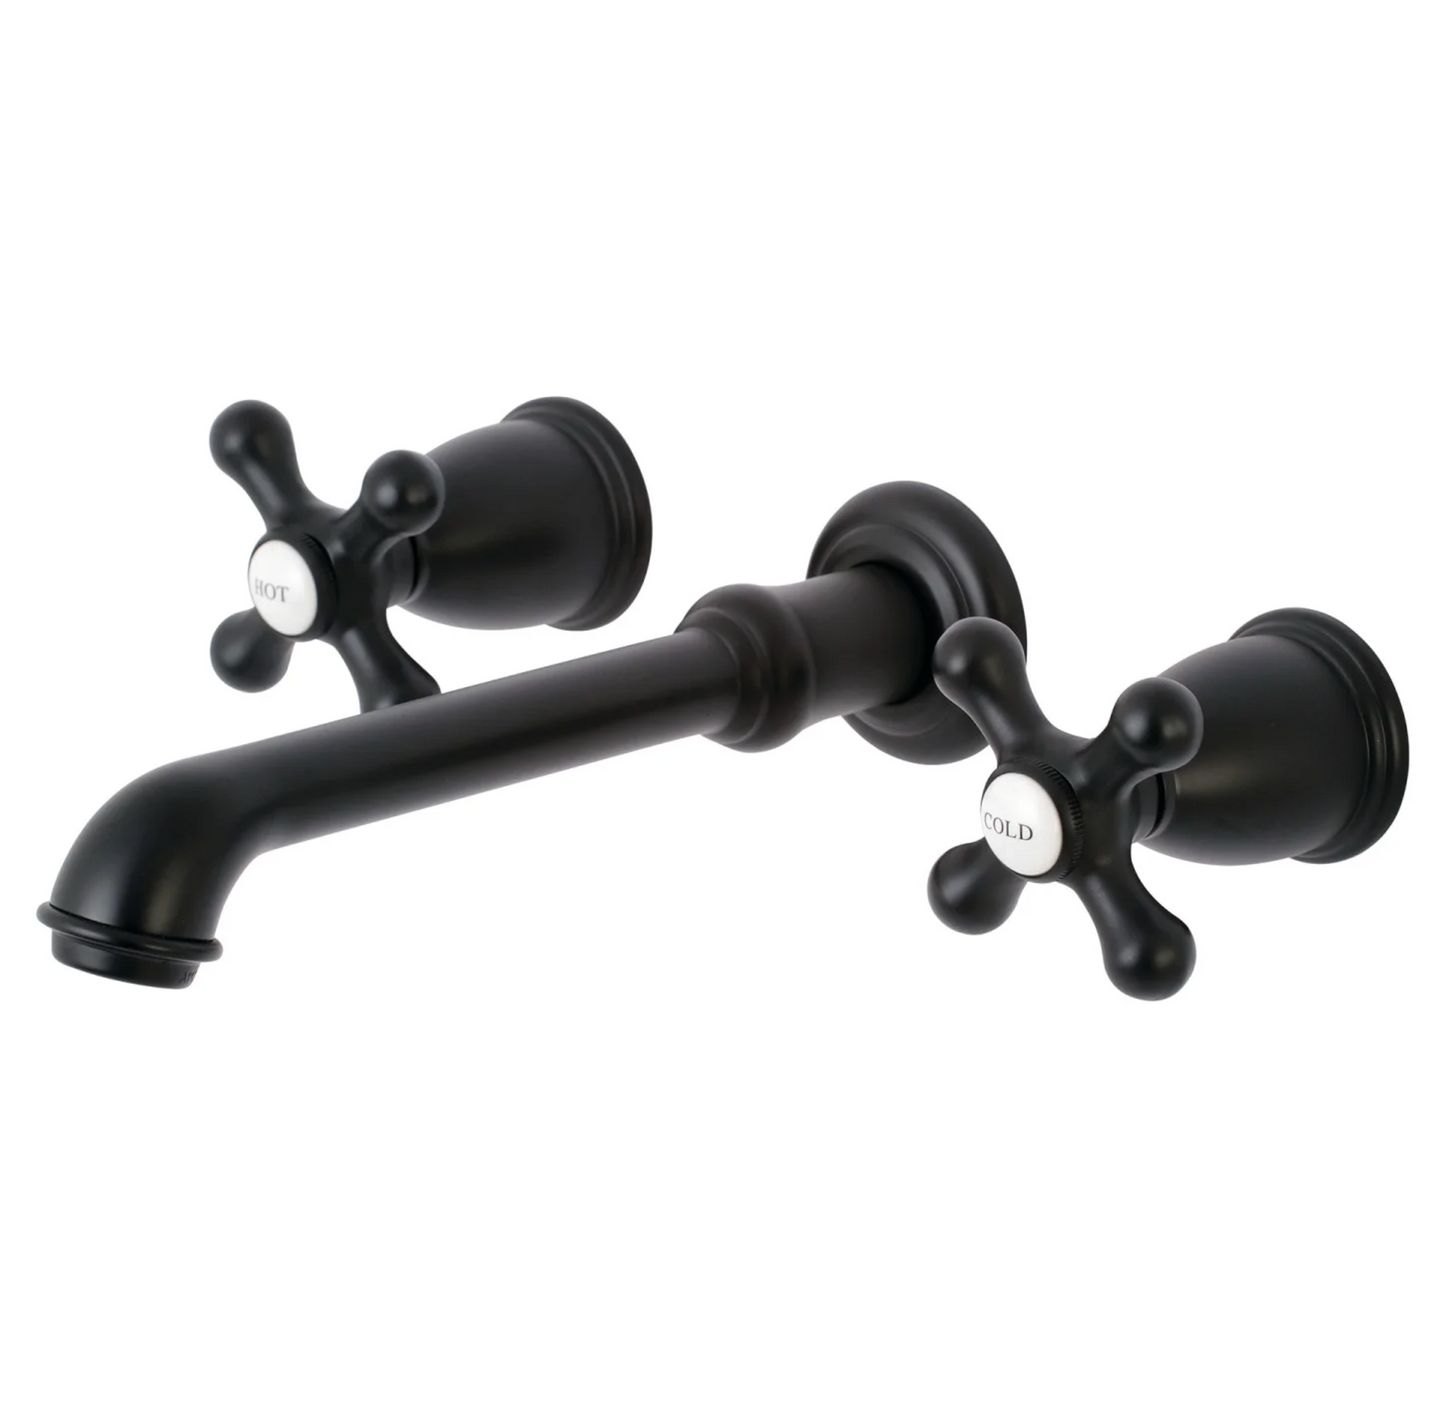 8-Inch Center Wall Mount Bathroom Faucet